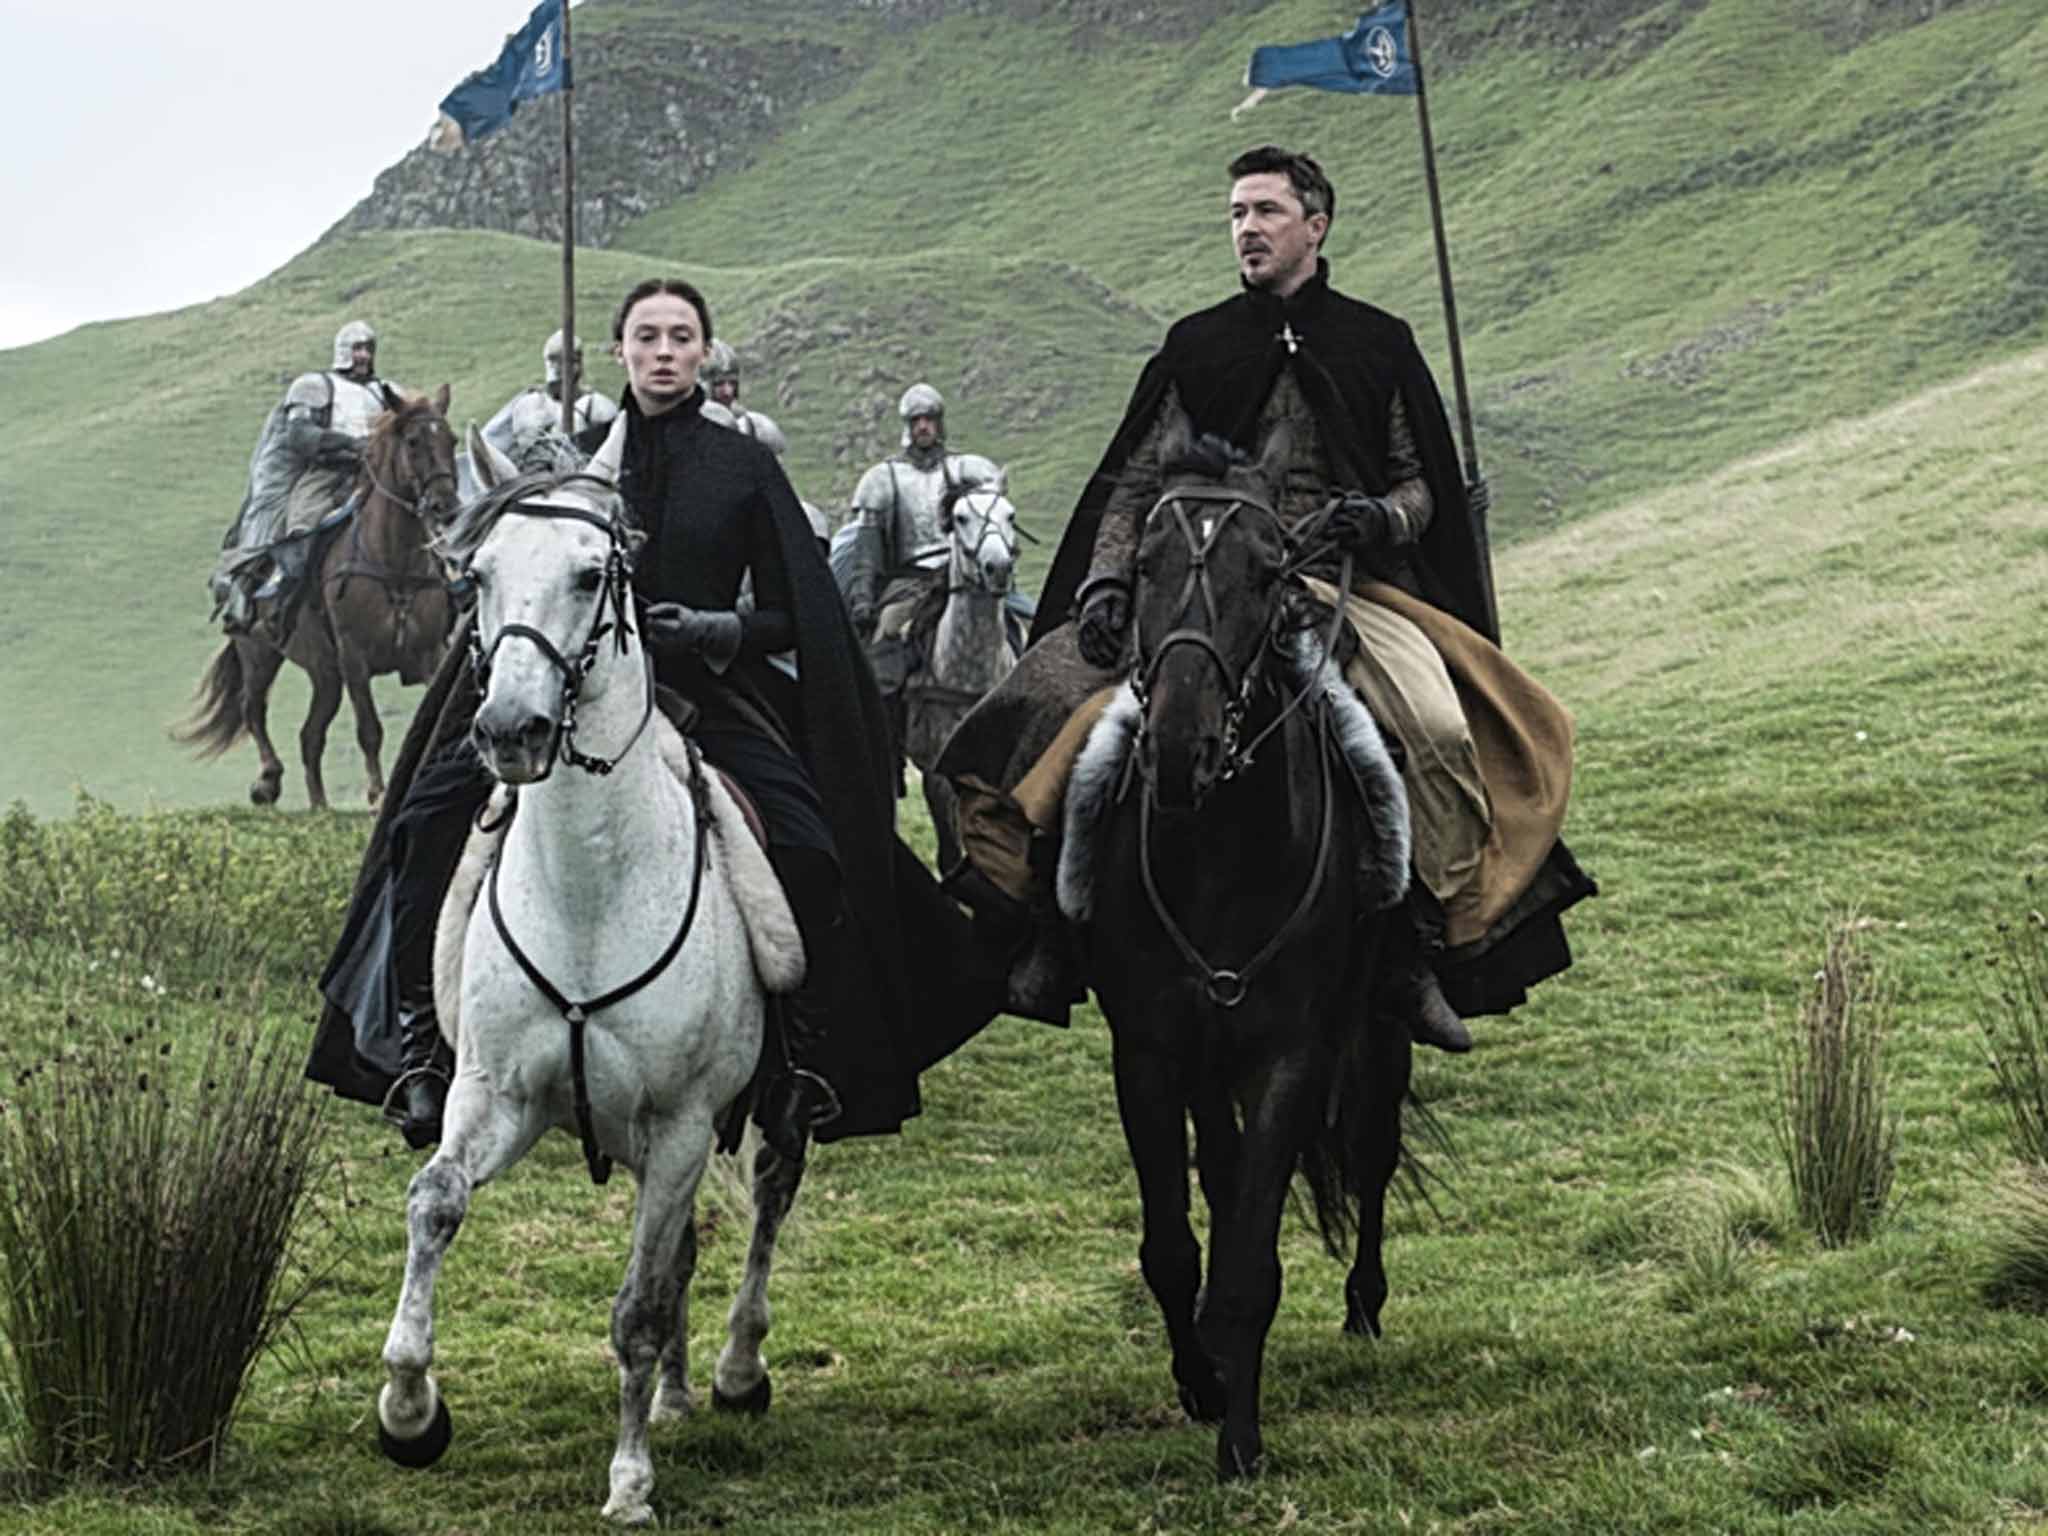 Horse play: Unexpected unions are being forged in 'Game of Thrones'